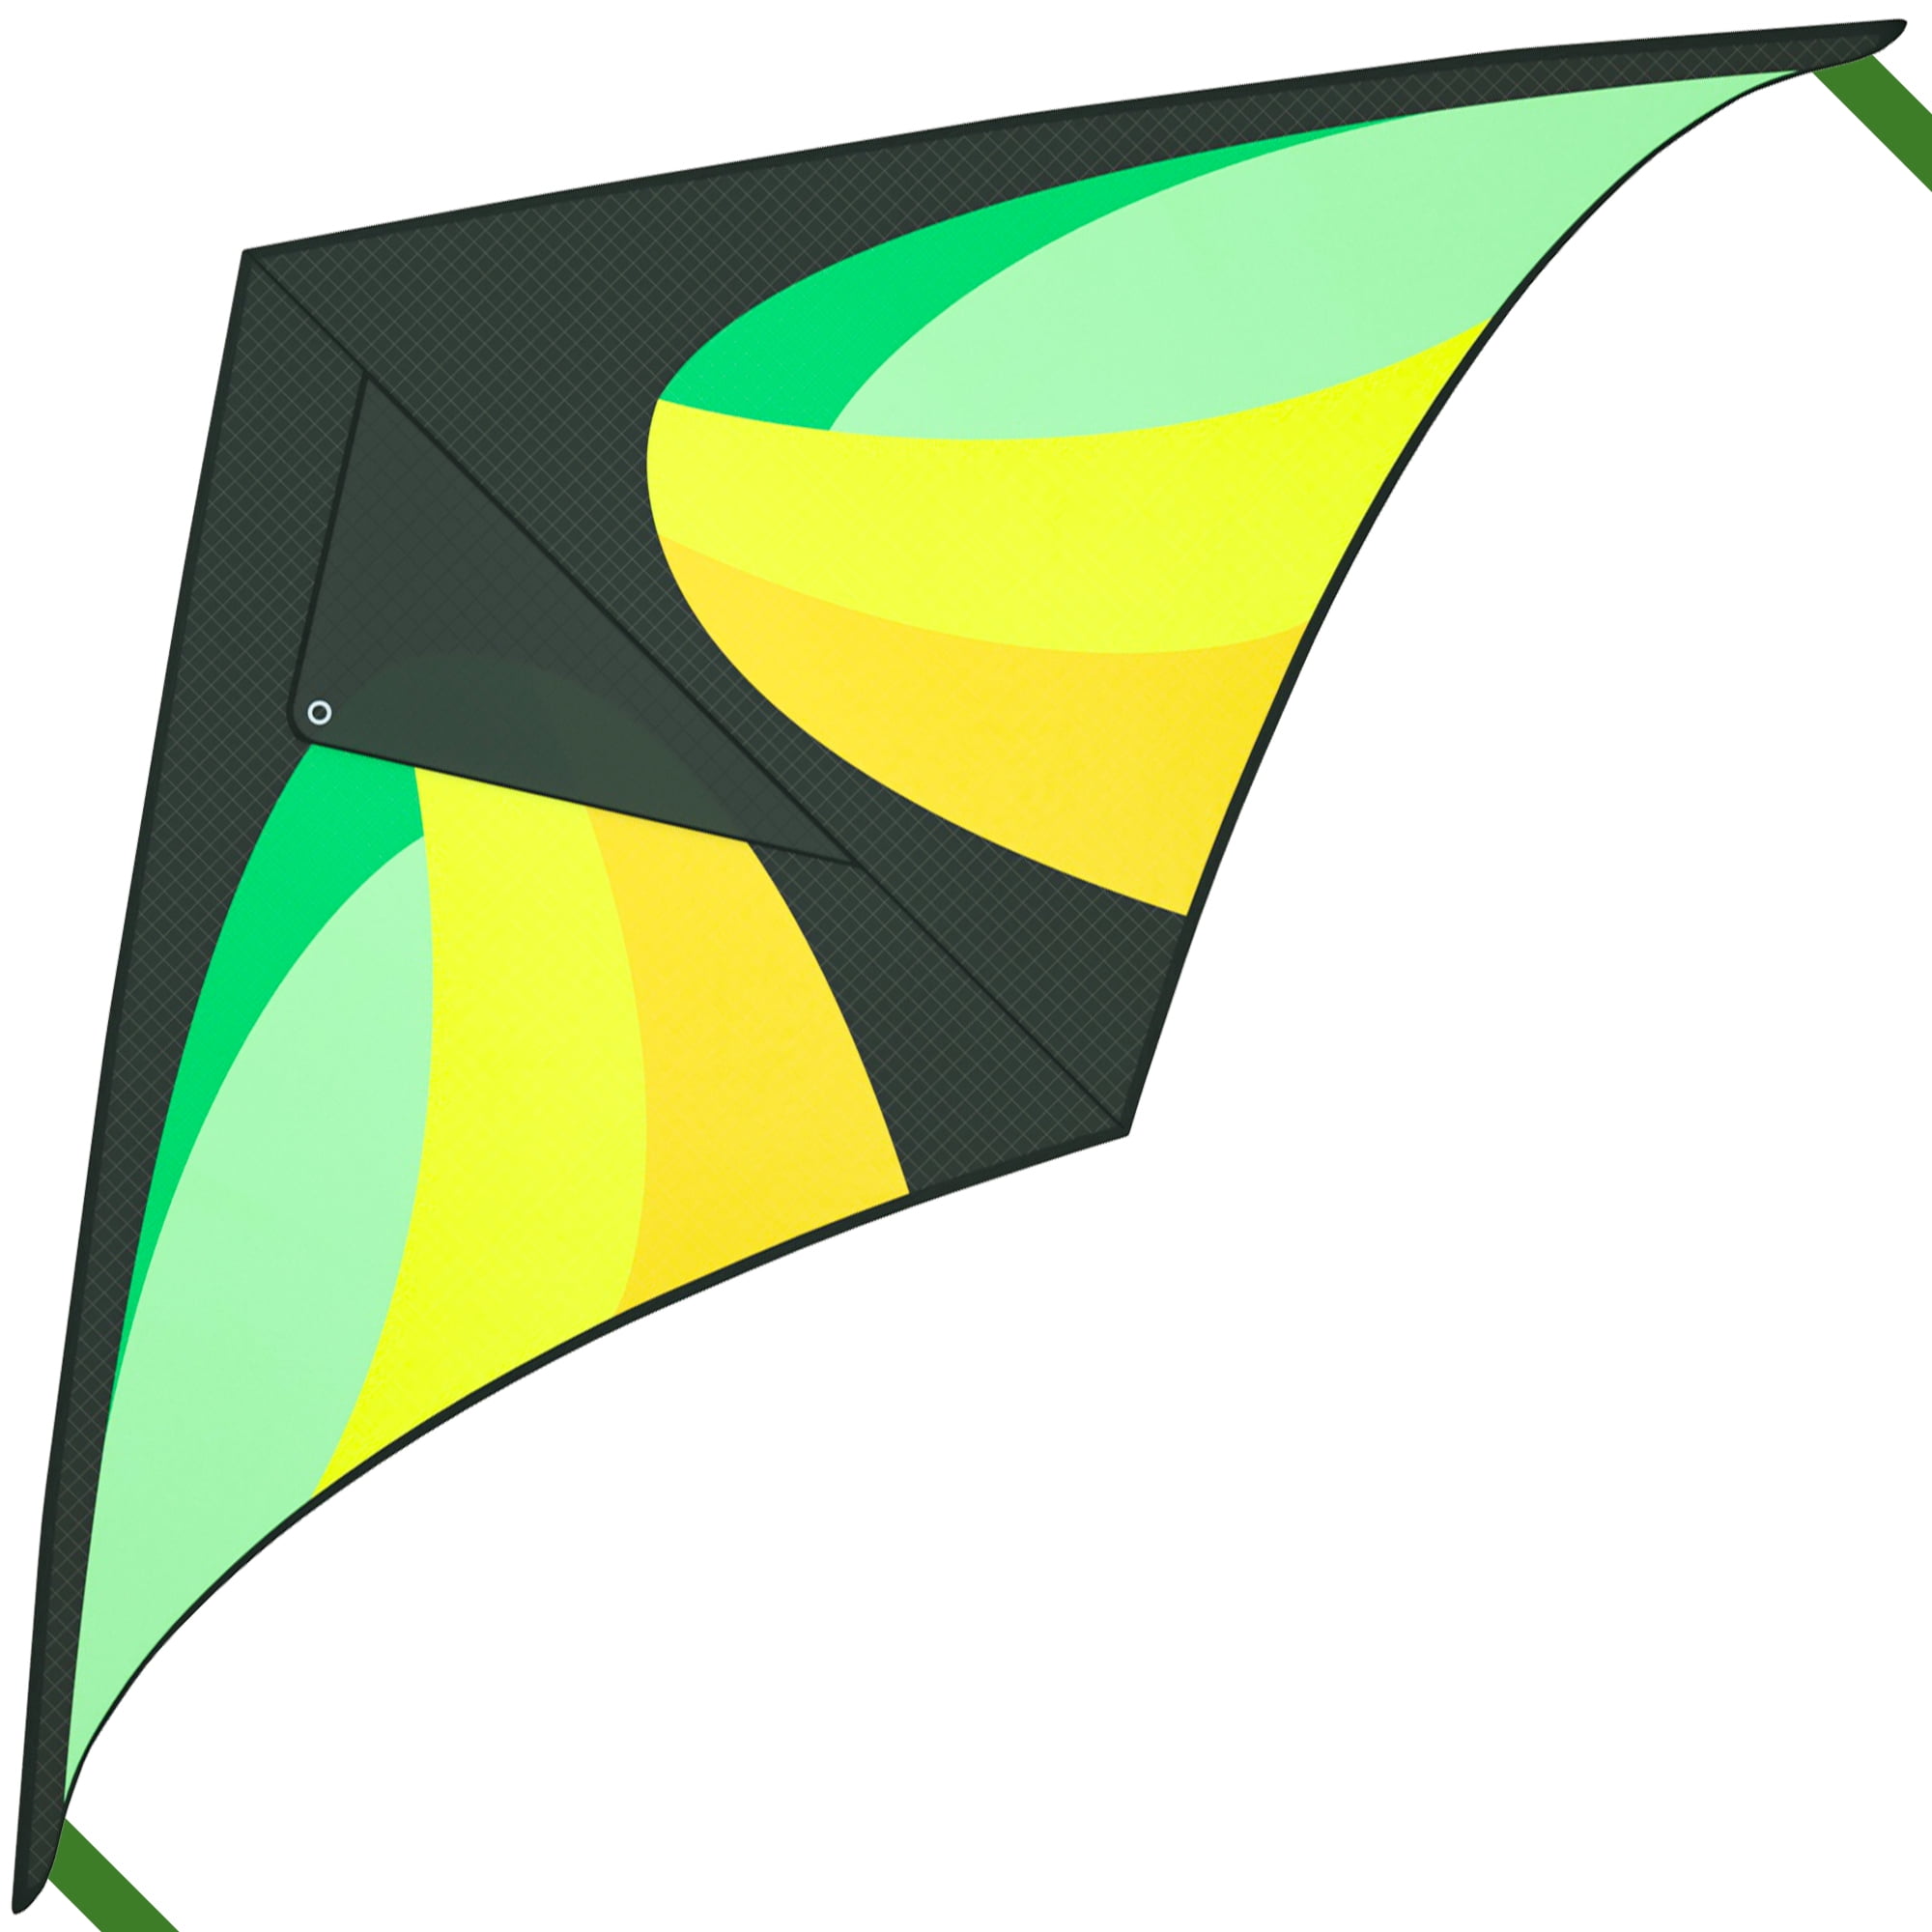  Colorful Kite for Kids & Adults, Easy to Fly Kite for Beach  Trip, Beginners Kids Kite for Family Outdoor Games and Activities, String  Line Included (Multicolor, One Size) : צעצועים ומשחקים